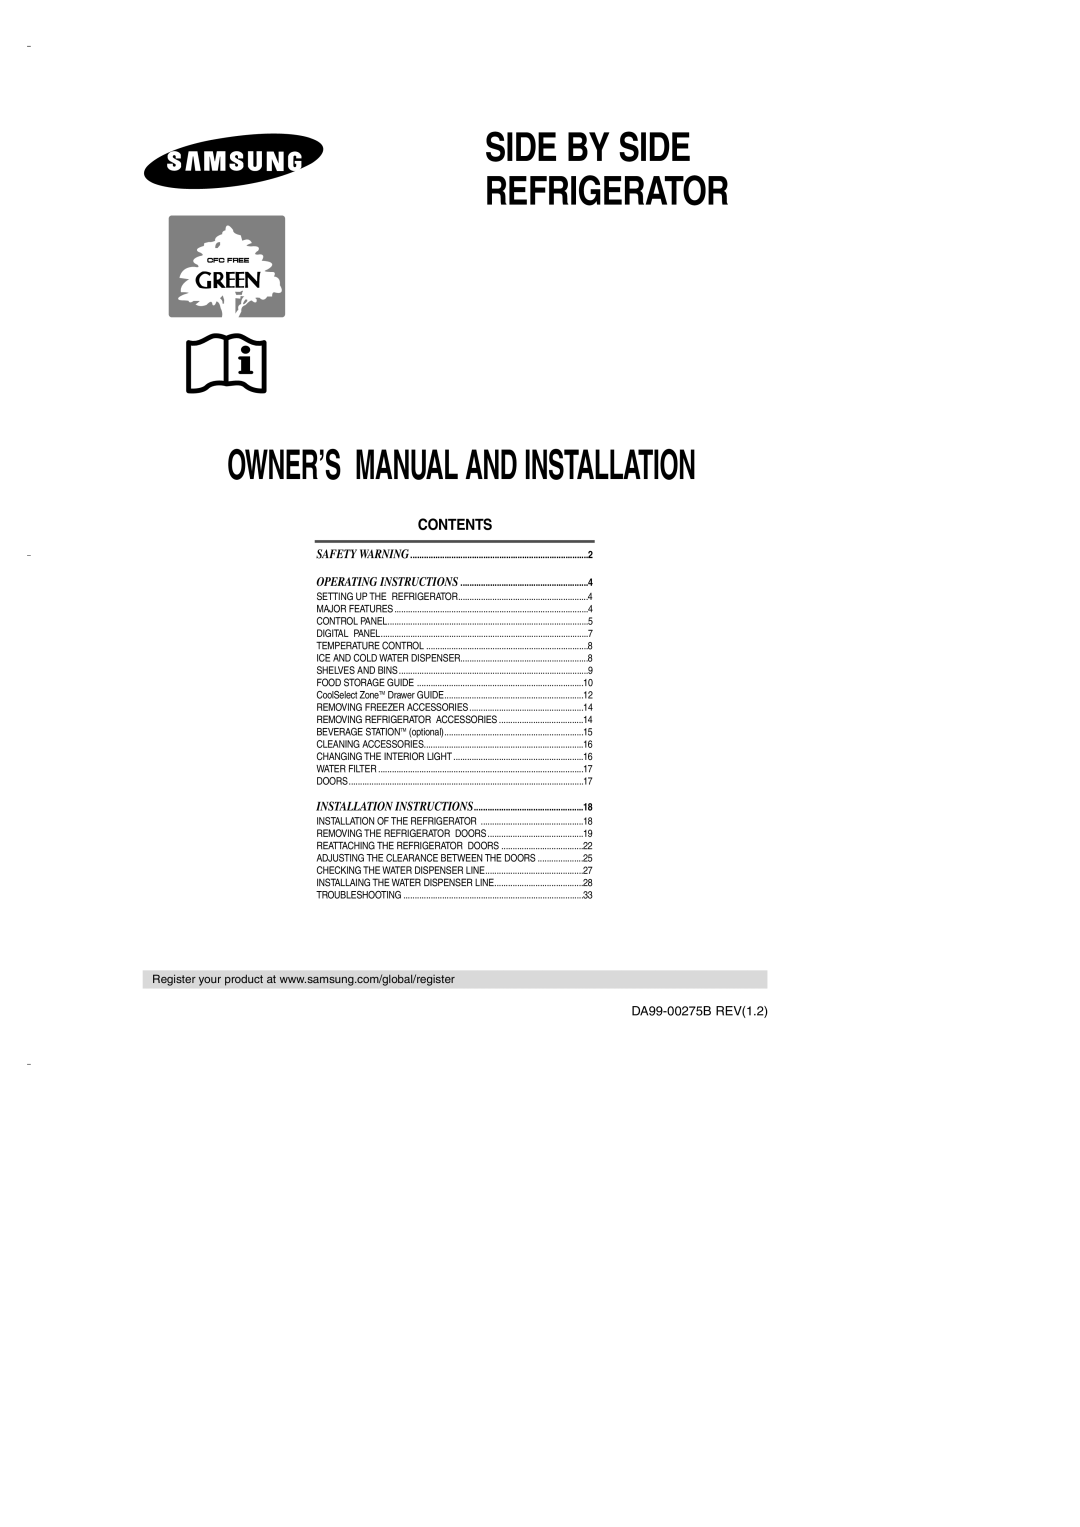 Samsung DA99-00275B owner manual Contents, Side By Side Refrigerator, Safety Warning, Operating Instructions 